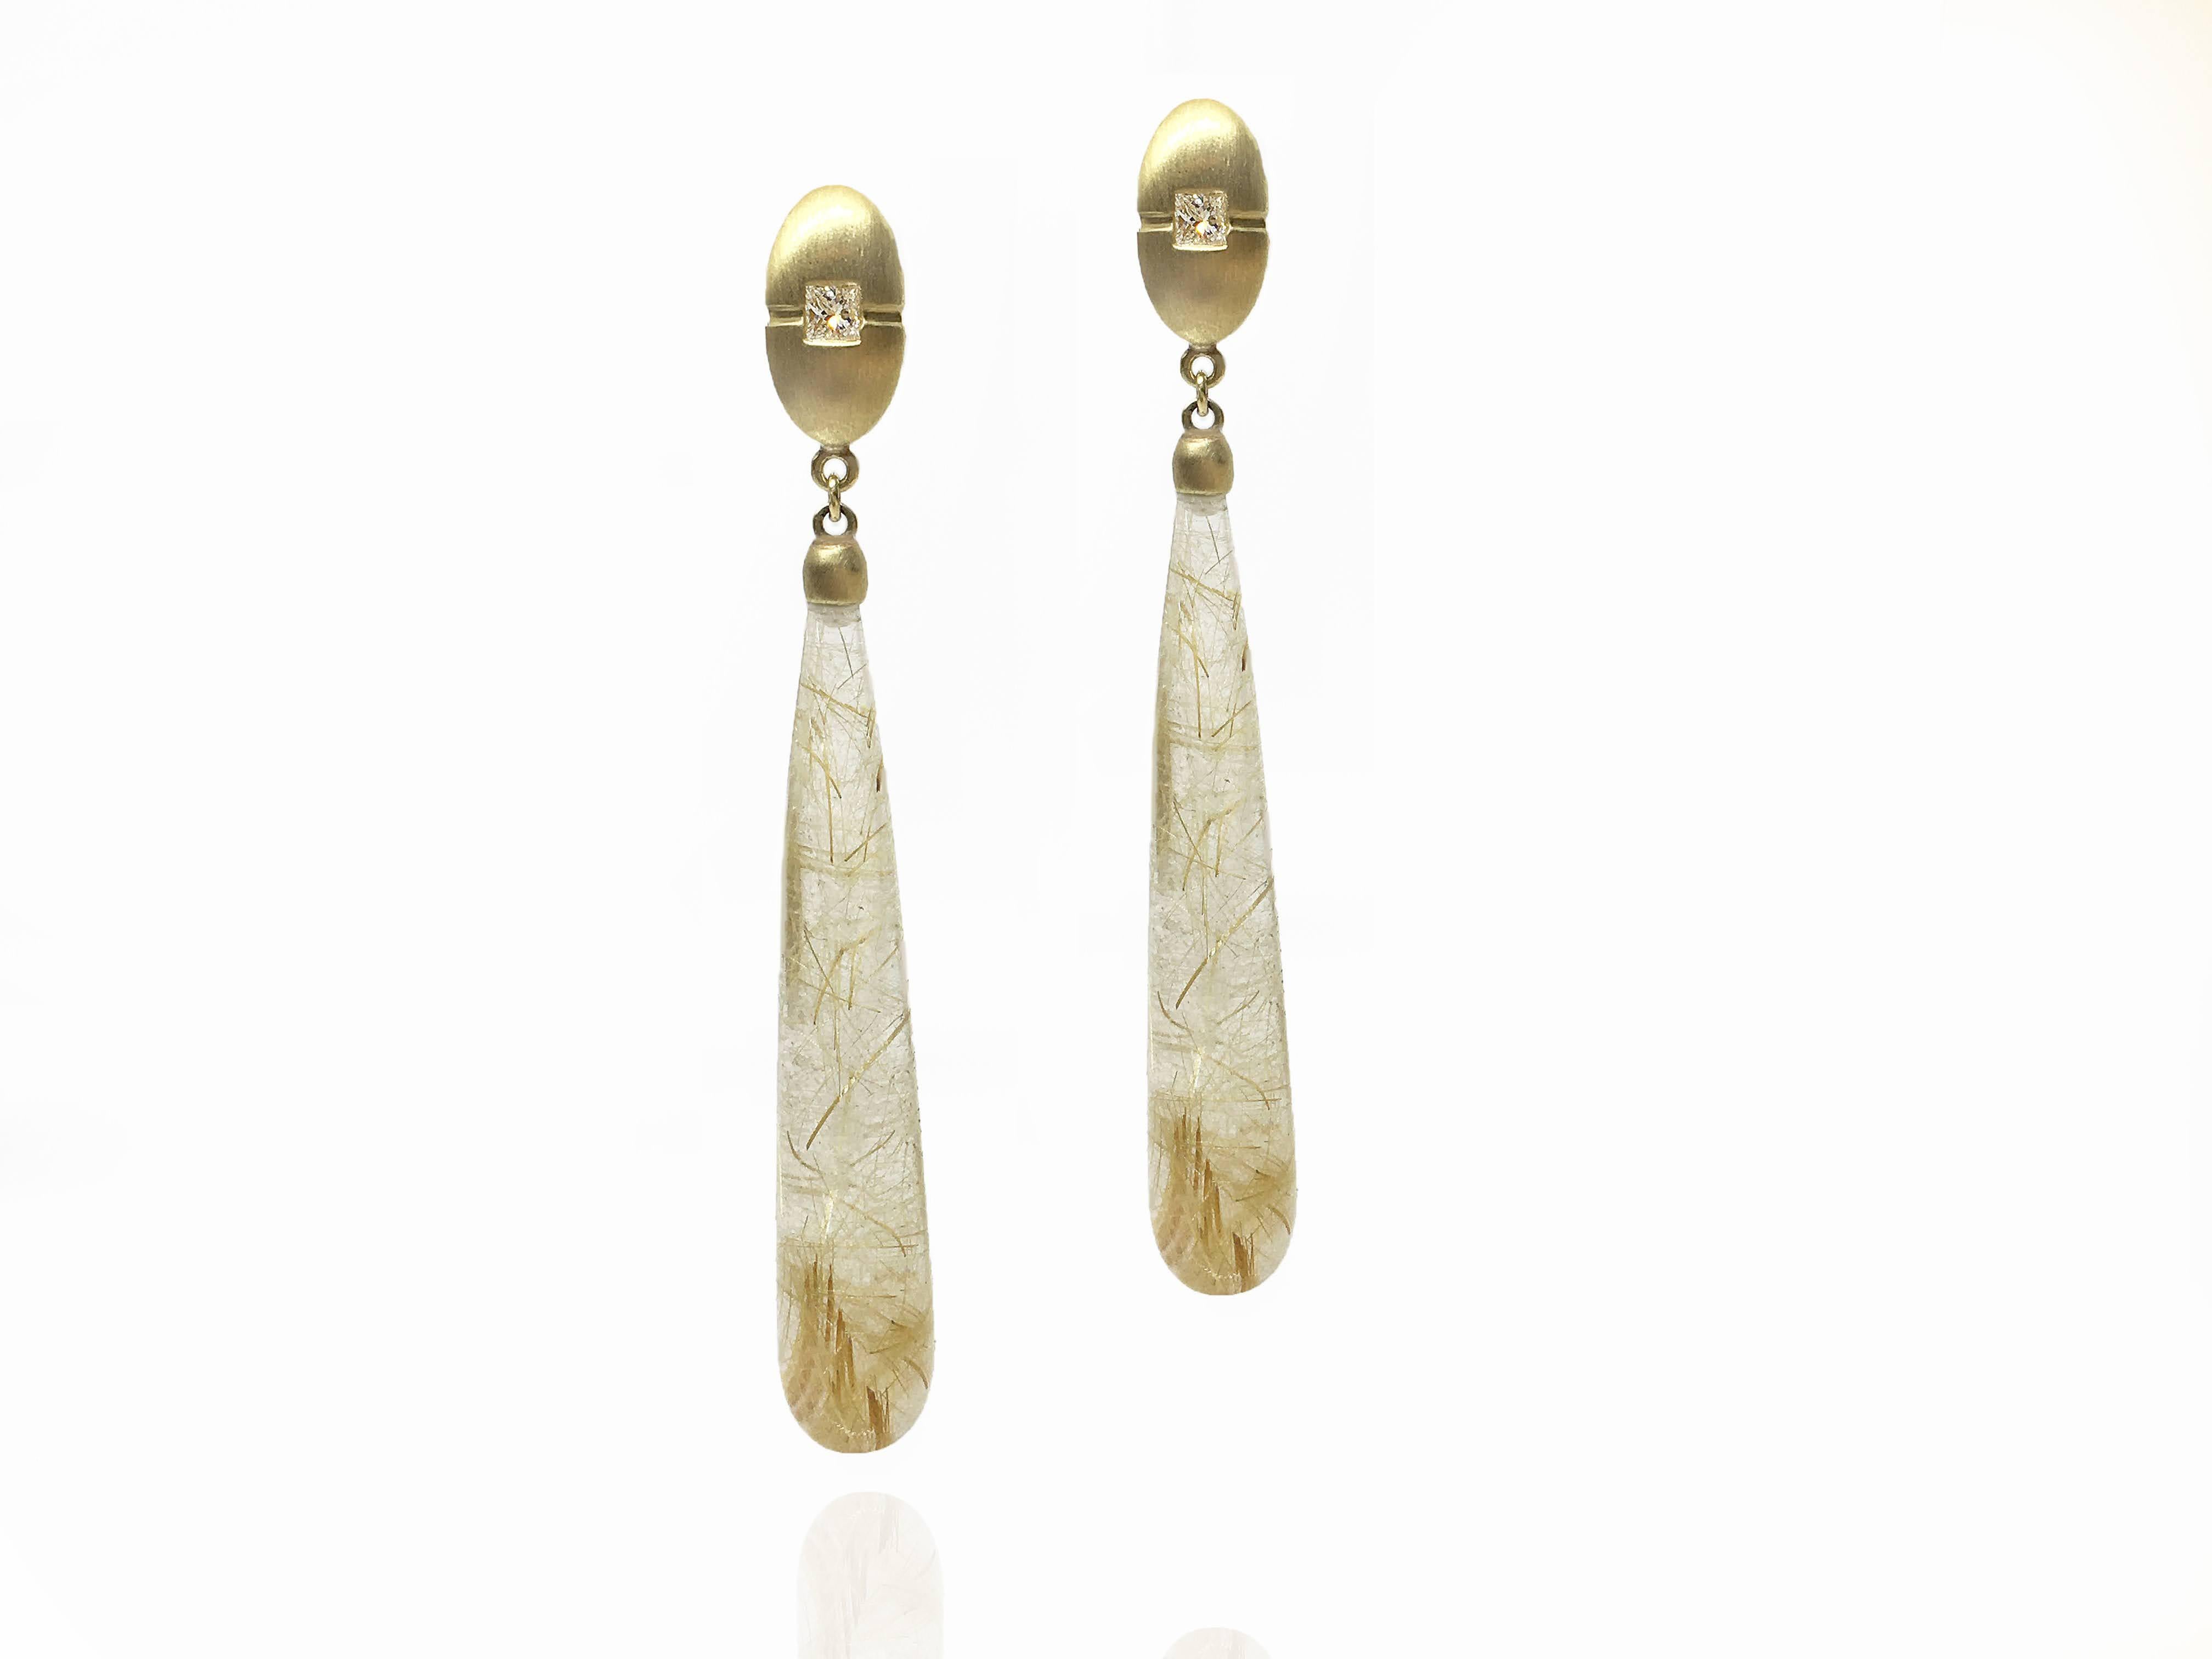 These elegant one-of-a-kind rutilated quartz long drop earrings are sourced from and cut in Brazil. With exceptional clarity and lovely strands of rutiles growing within the quartz give the impression of woven strands of gold within. The long drops